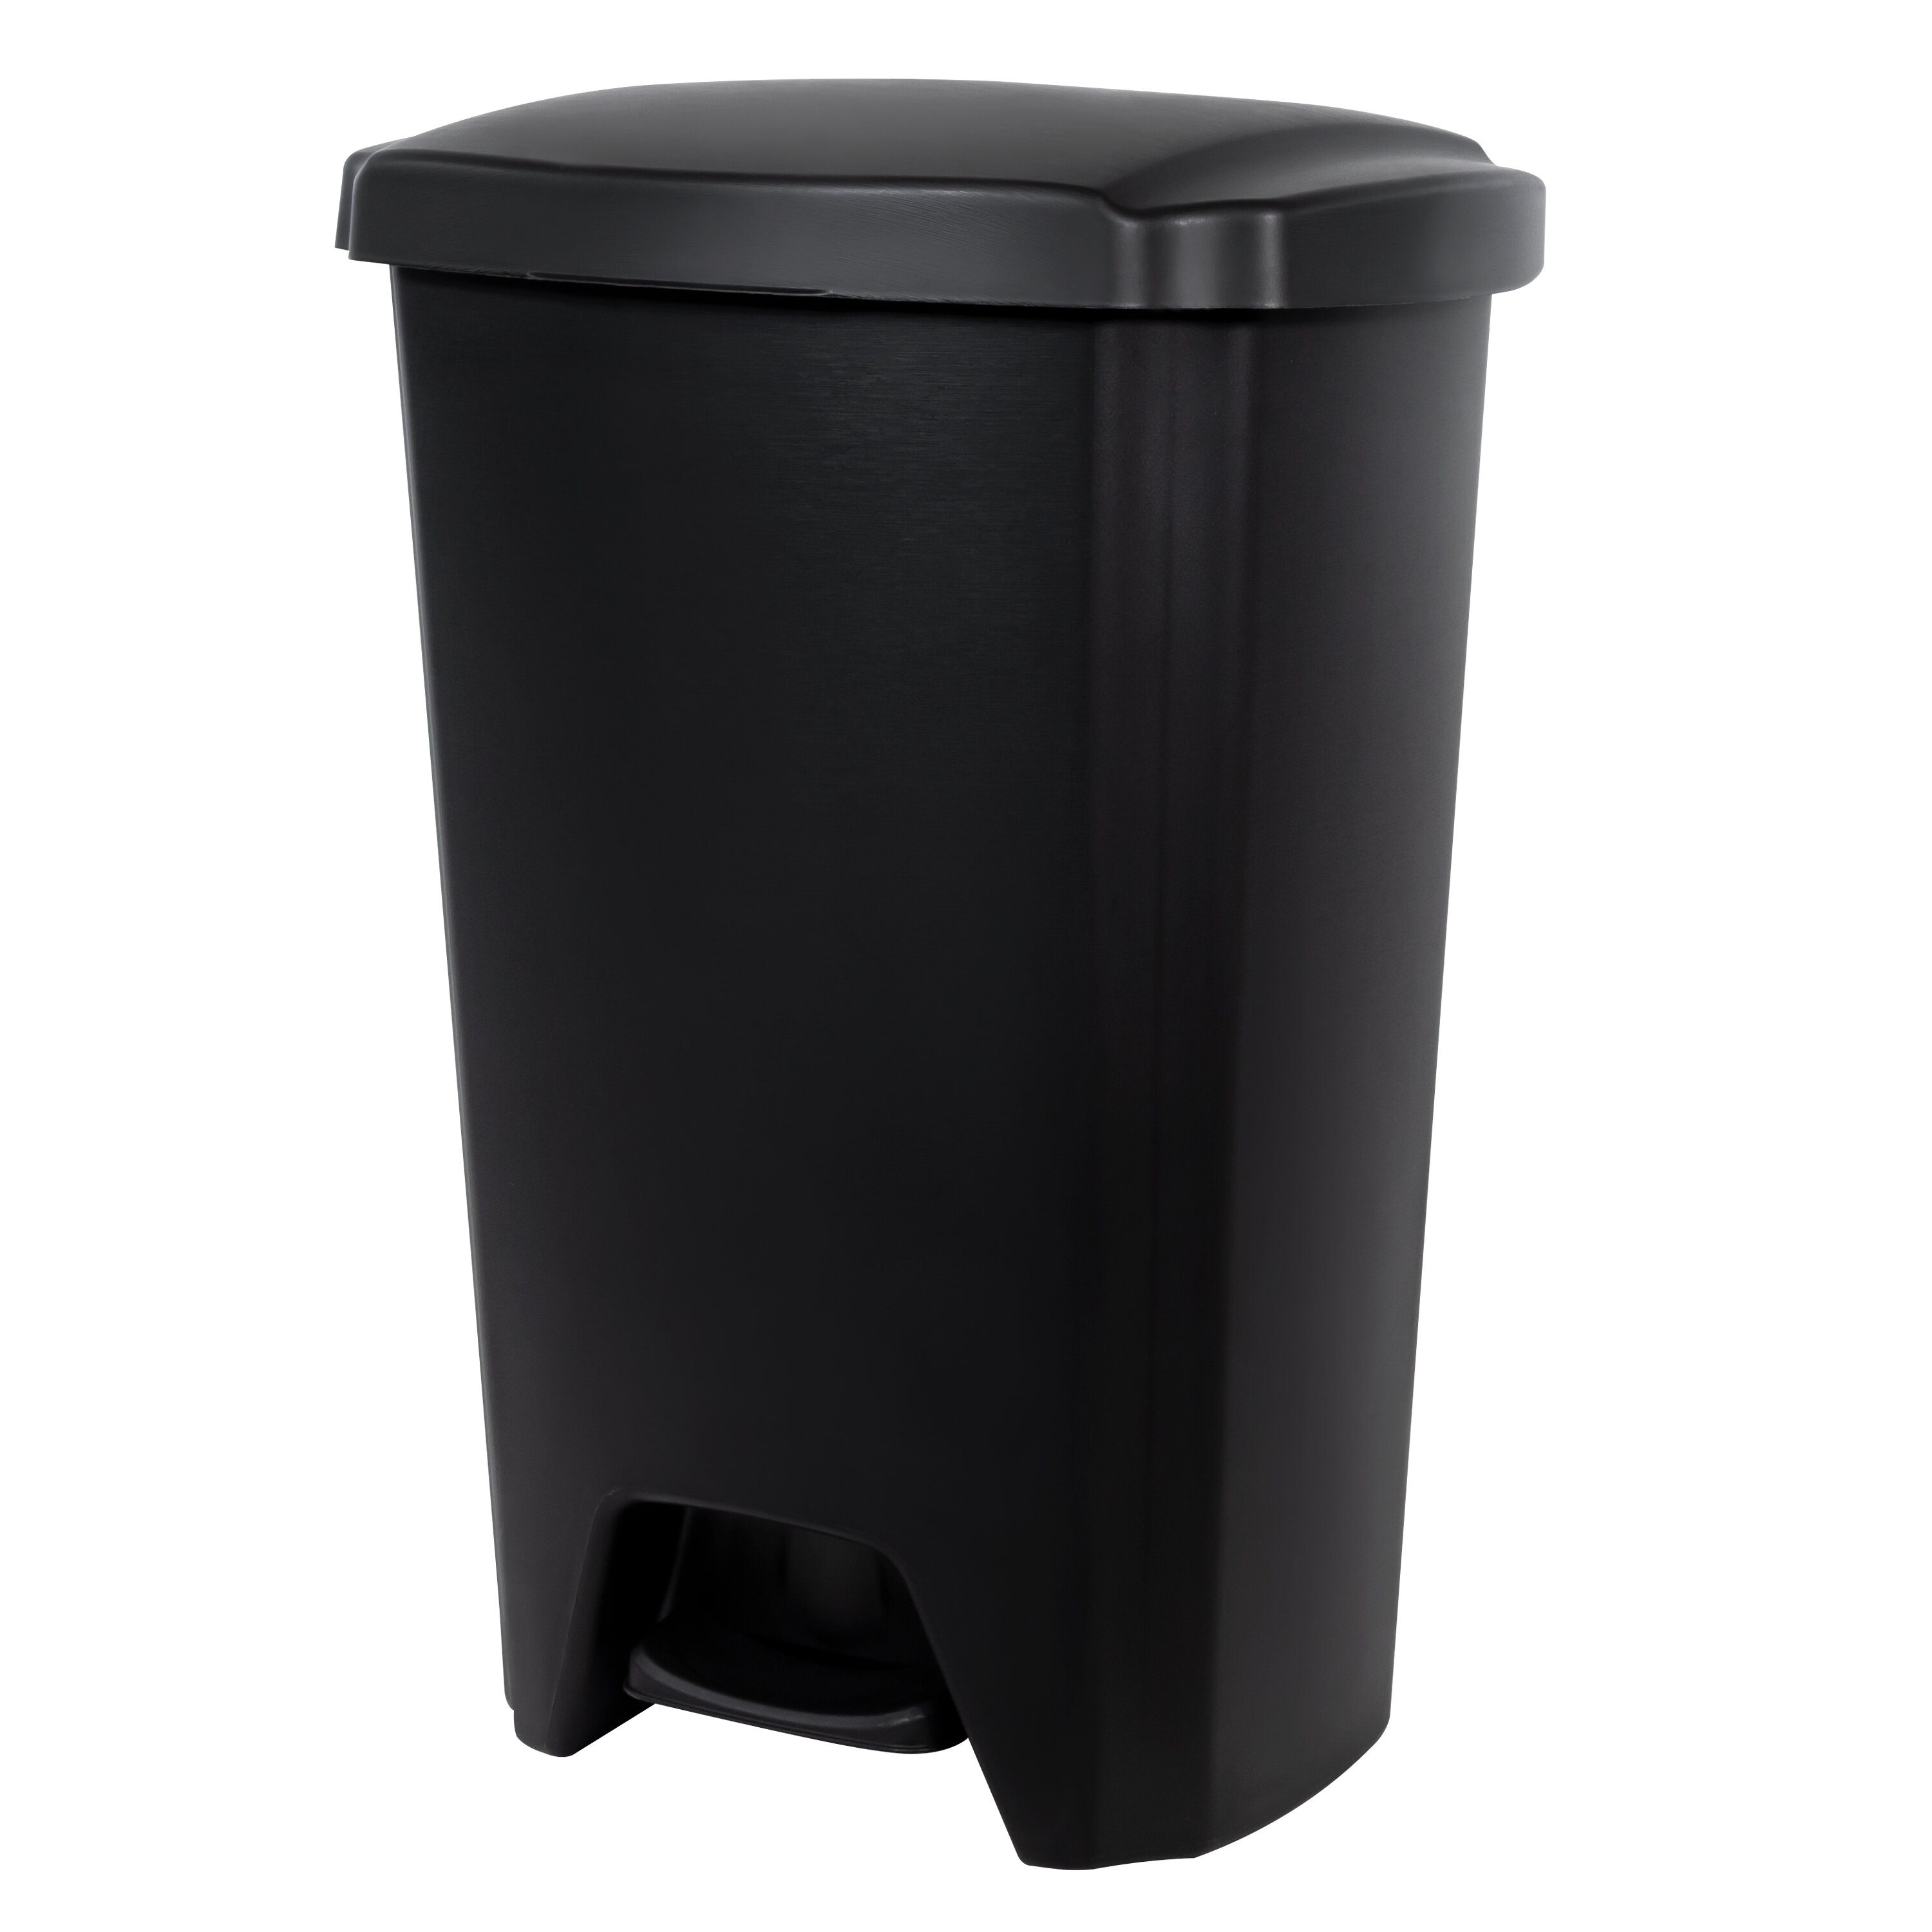 Rubbermaid Classic Step-On Trash Can with Lid, 13-Gallon, Black, Easy Clean  Wastebasket for Home/Kitchen/Bedroom/Office